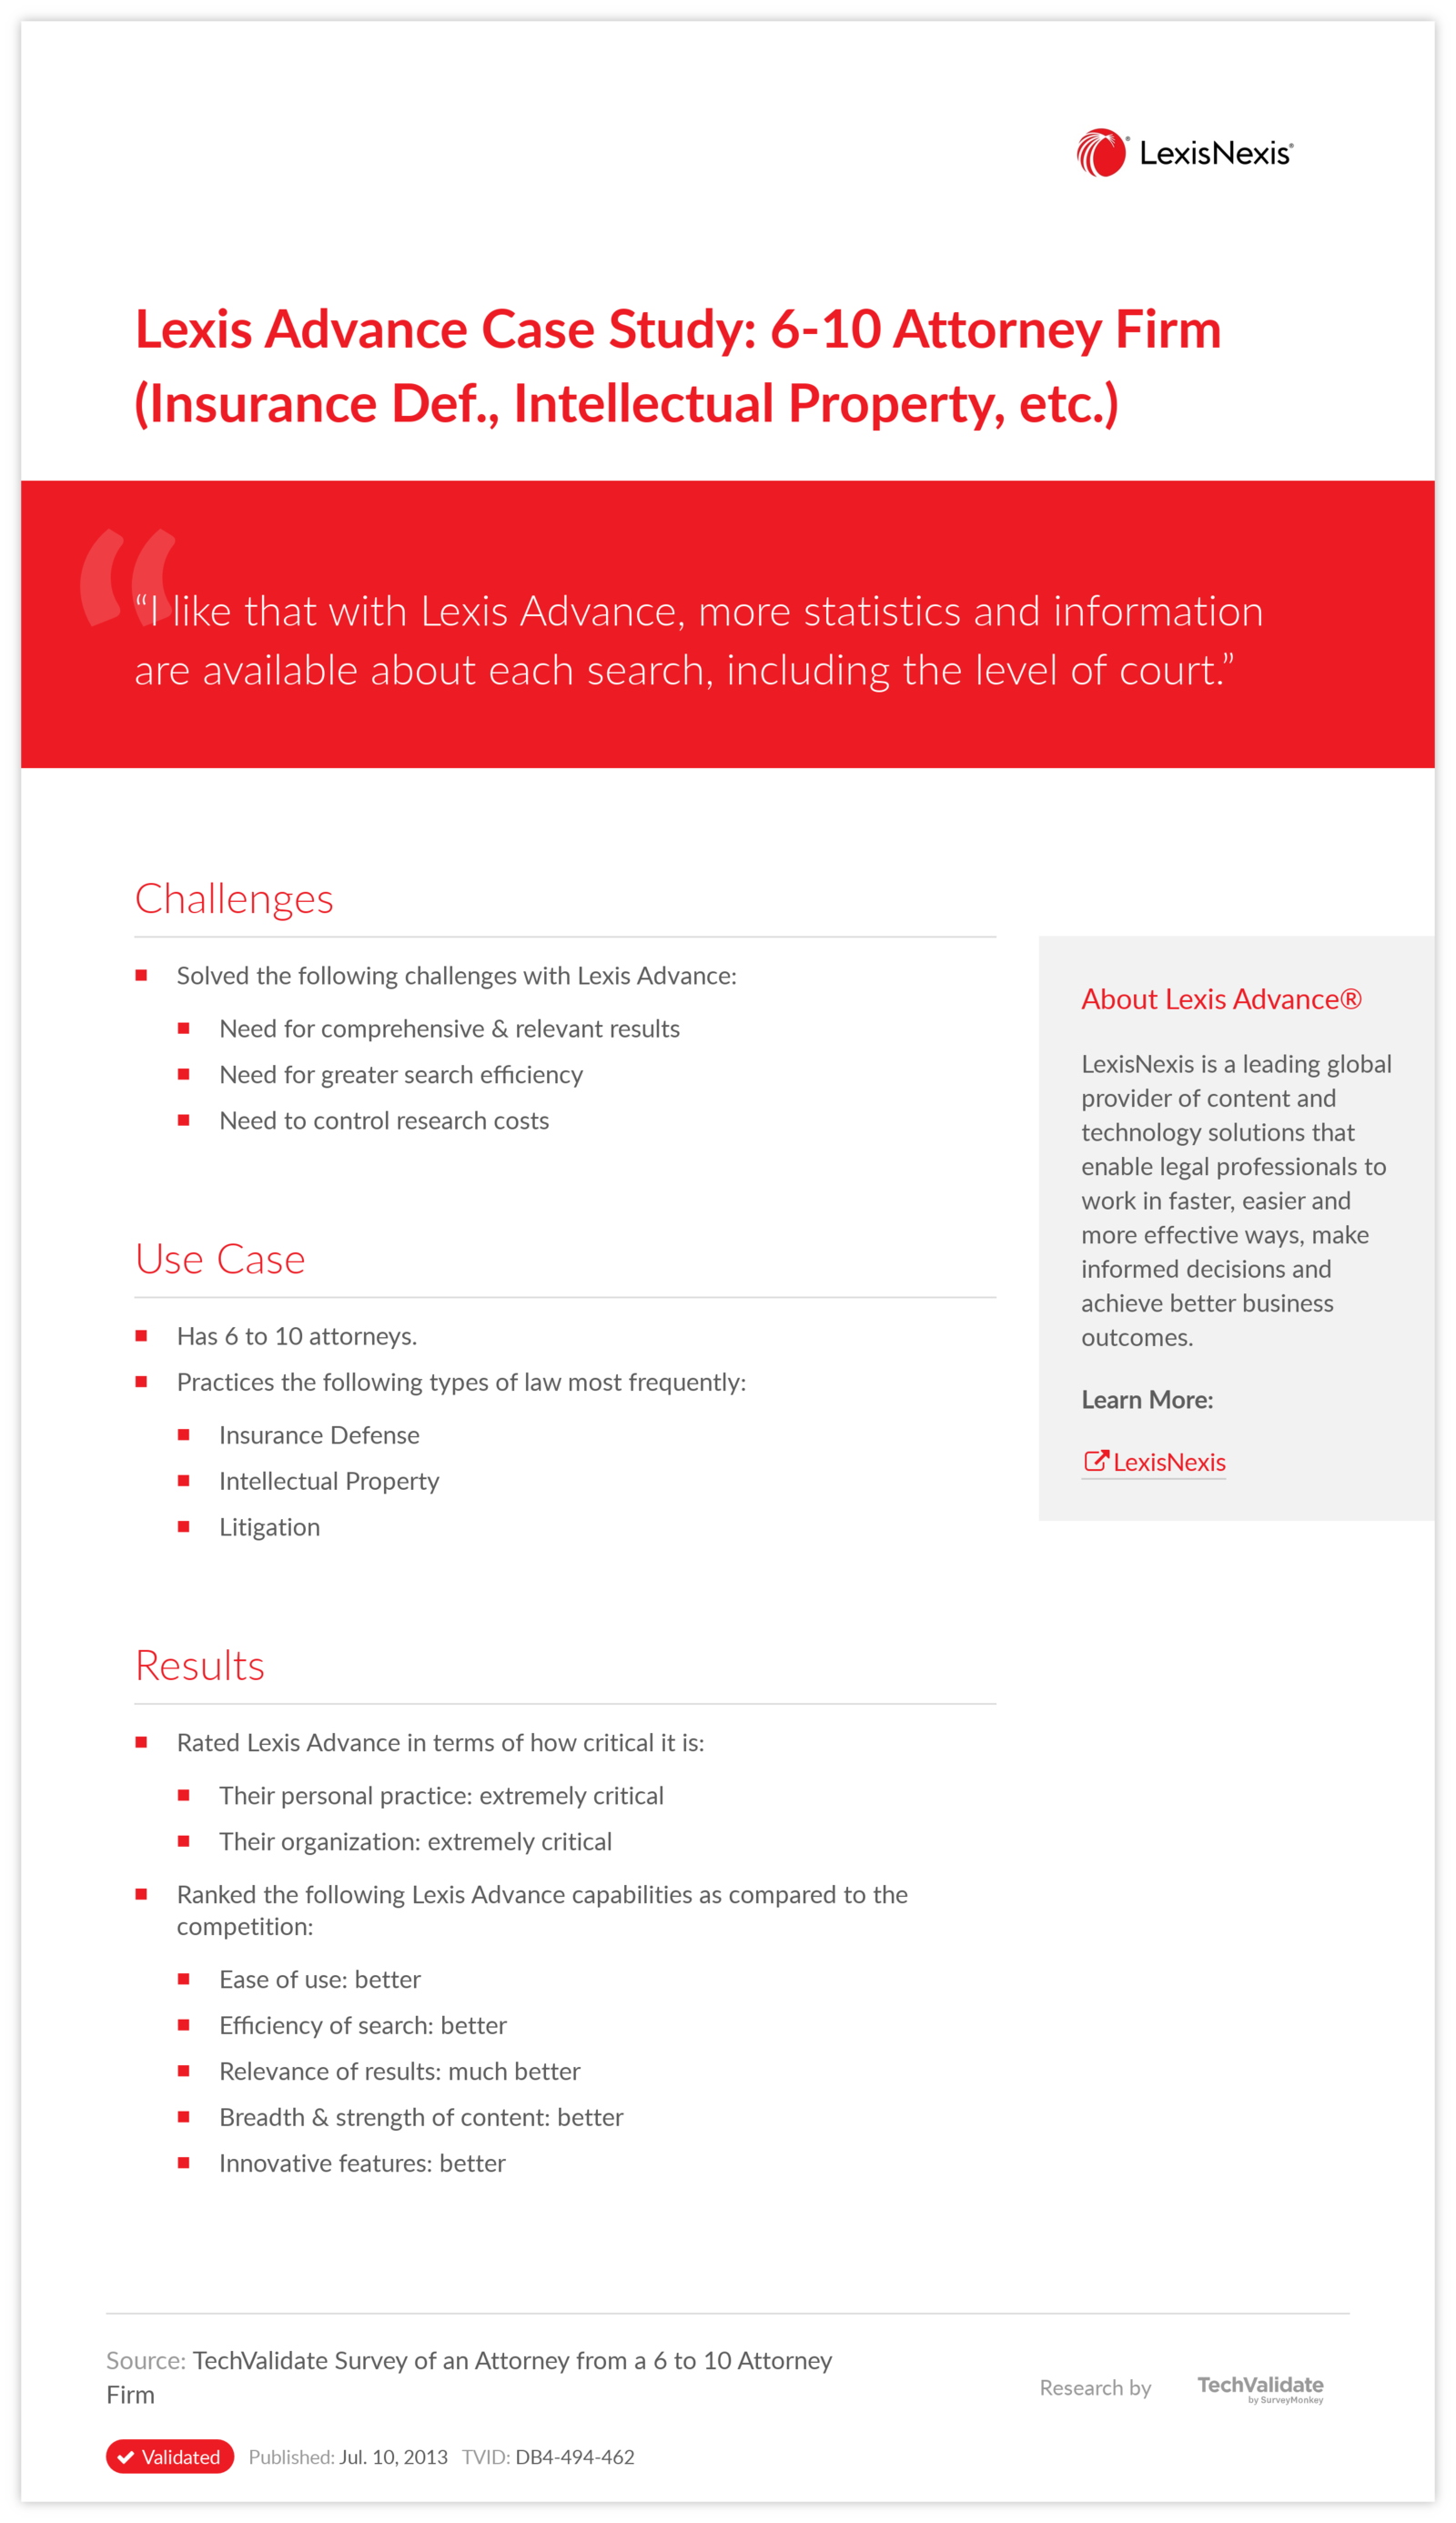 Lexis Advance Case Study: 6-10 Attorney Firm (Insurance Def., Intellectual Property, etc.)